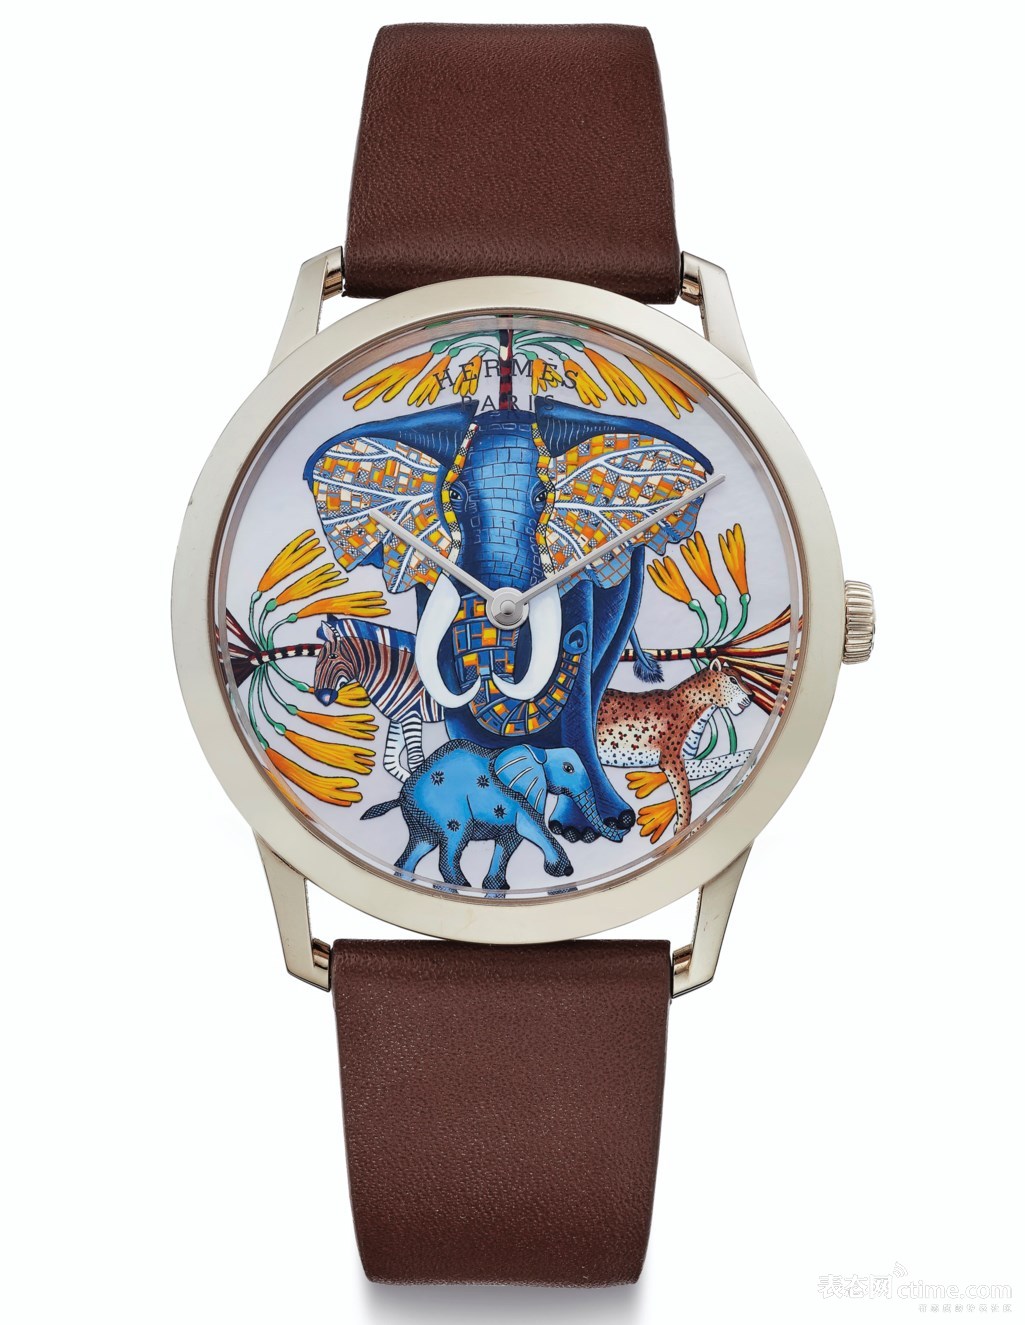 2019_NYR_17494_0041_000(hermes_a_fine_18k_white_gold_and_mother-of-pearl_automatic_limited_edi).jpg